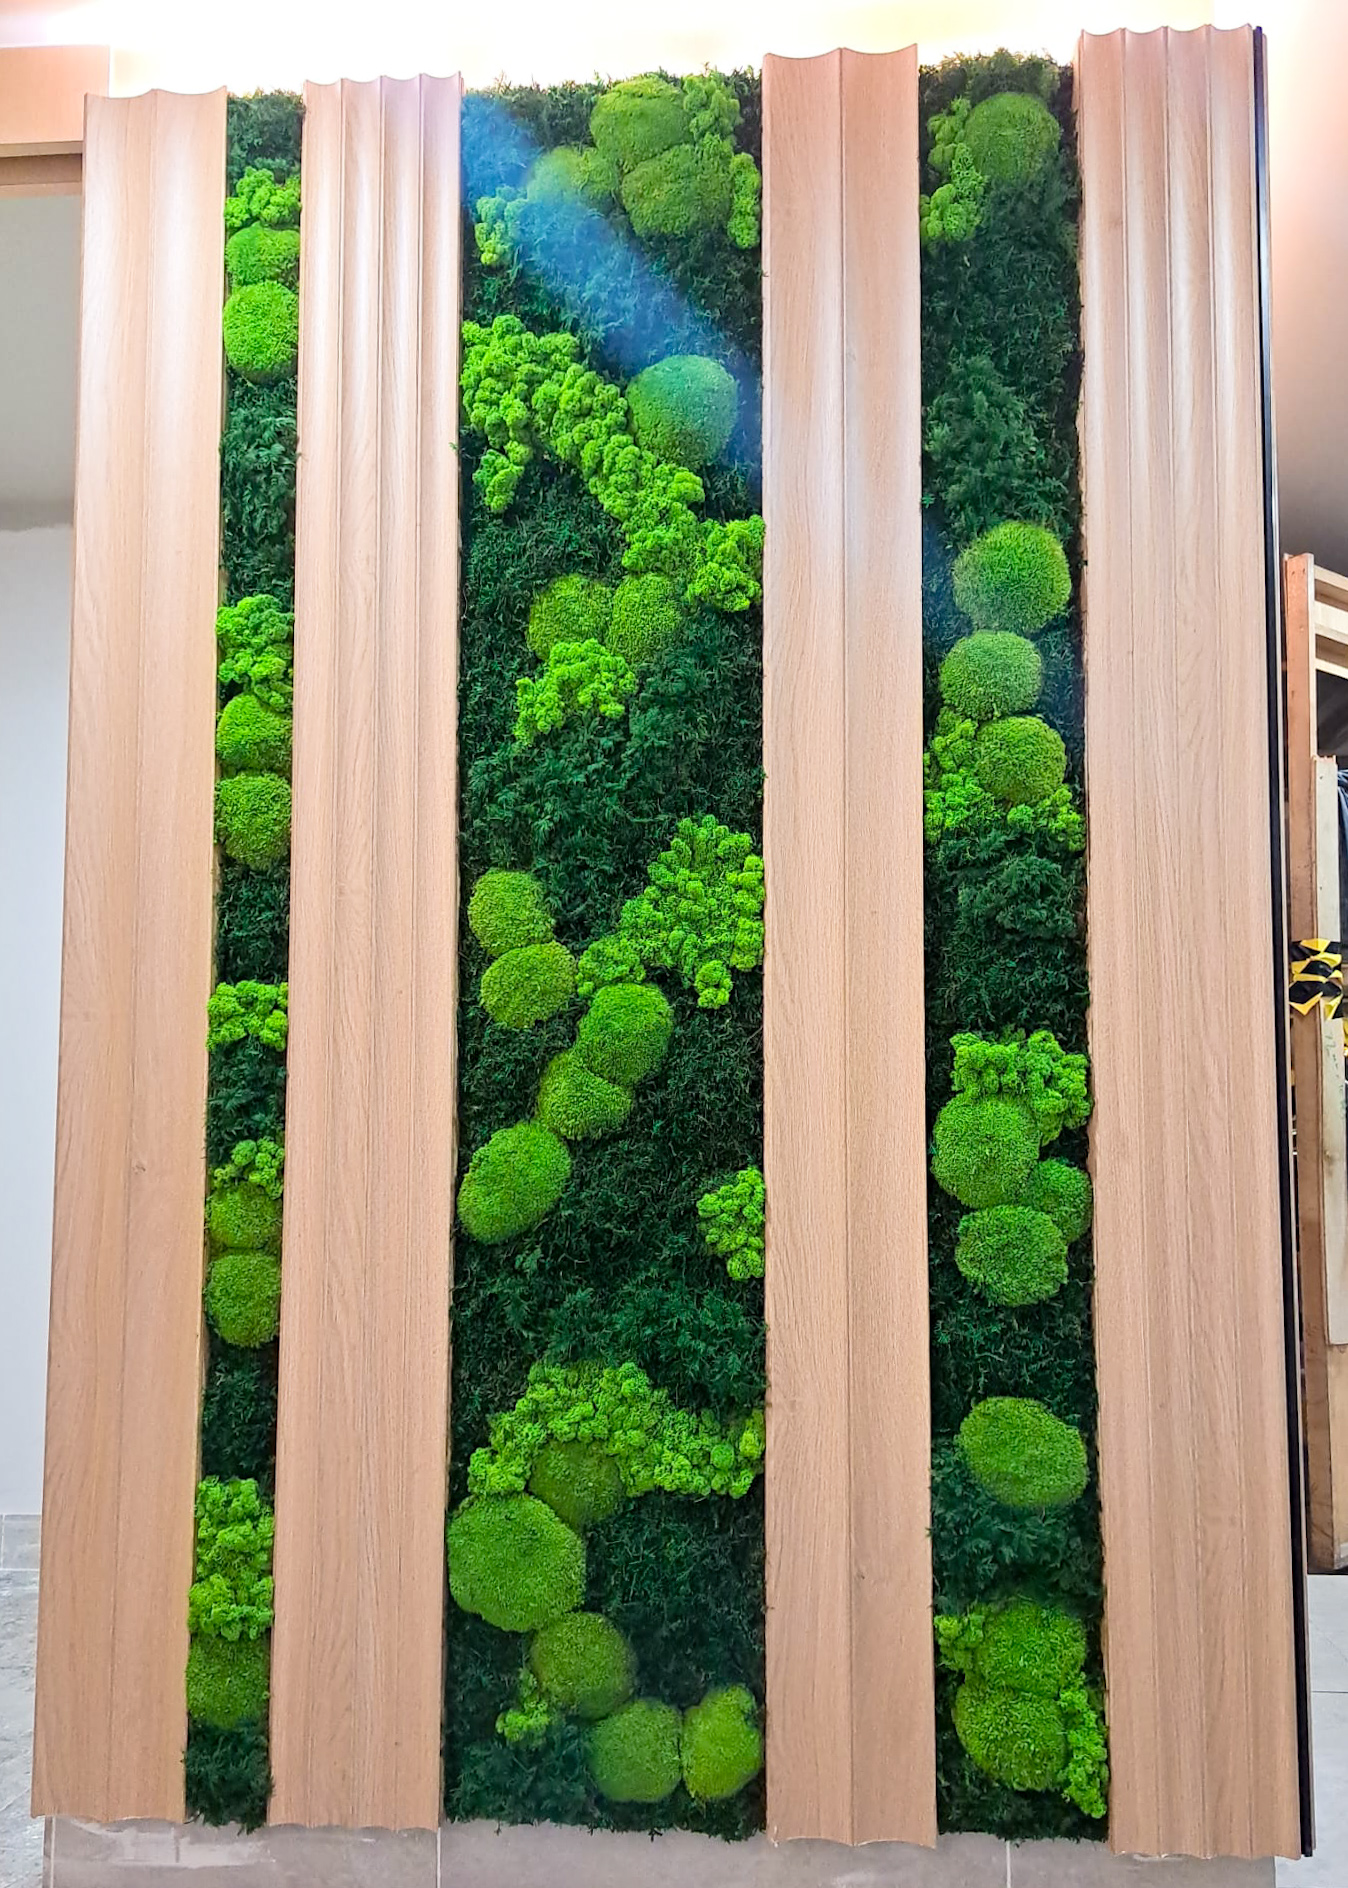 Commercial moss walls installation Indoor moss walls for office decor Sustainable moss wall systems for businesses Biophilic design with moss walls in commercial spaces Custom moss walls for corporate environments Commercial-grade moss wall panels Office lobby moss wall designs Maintenance-free moss walls for businesses Sound-absorbing moss walls for offices Corporate branding with moss walls